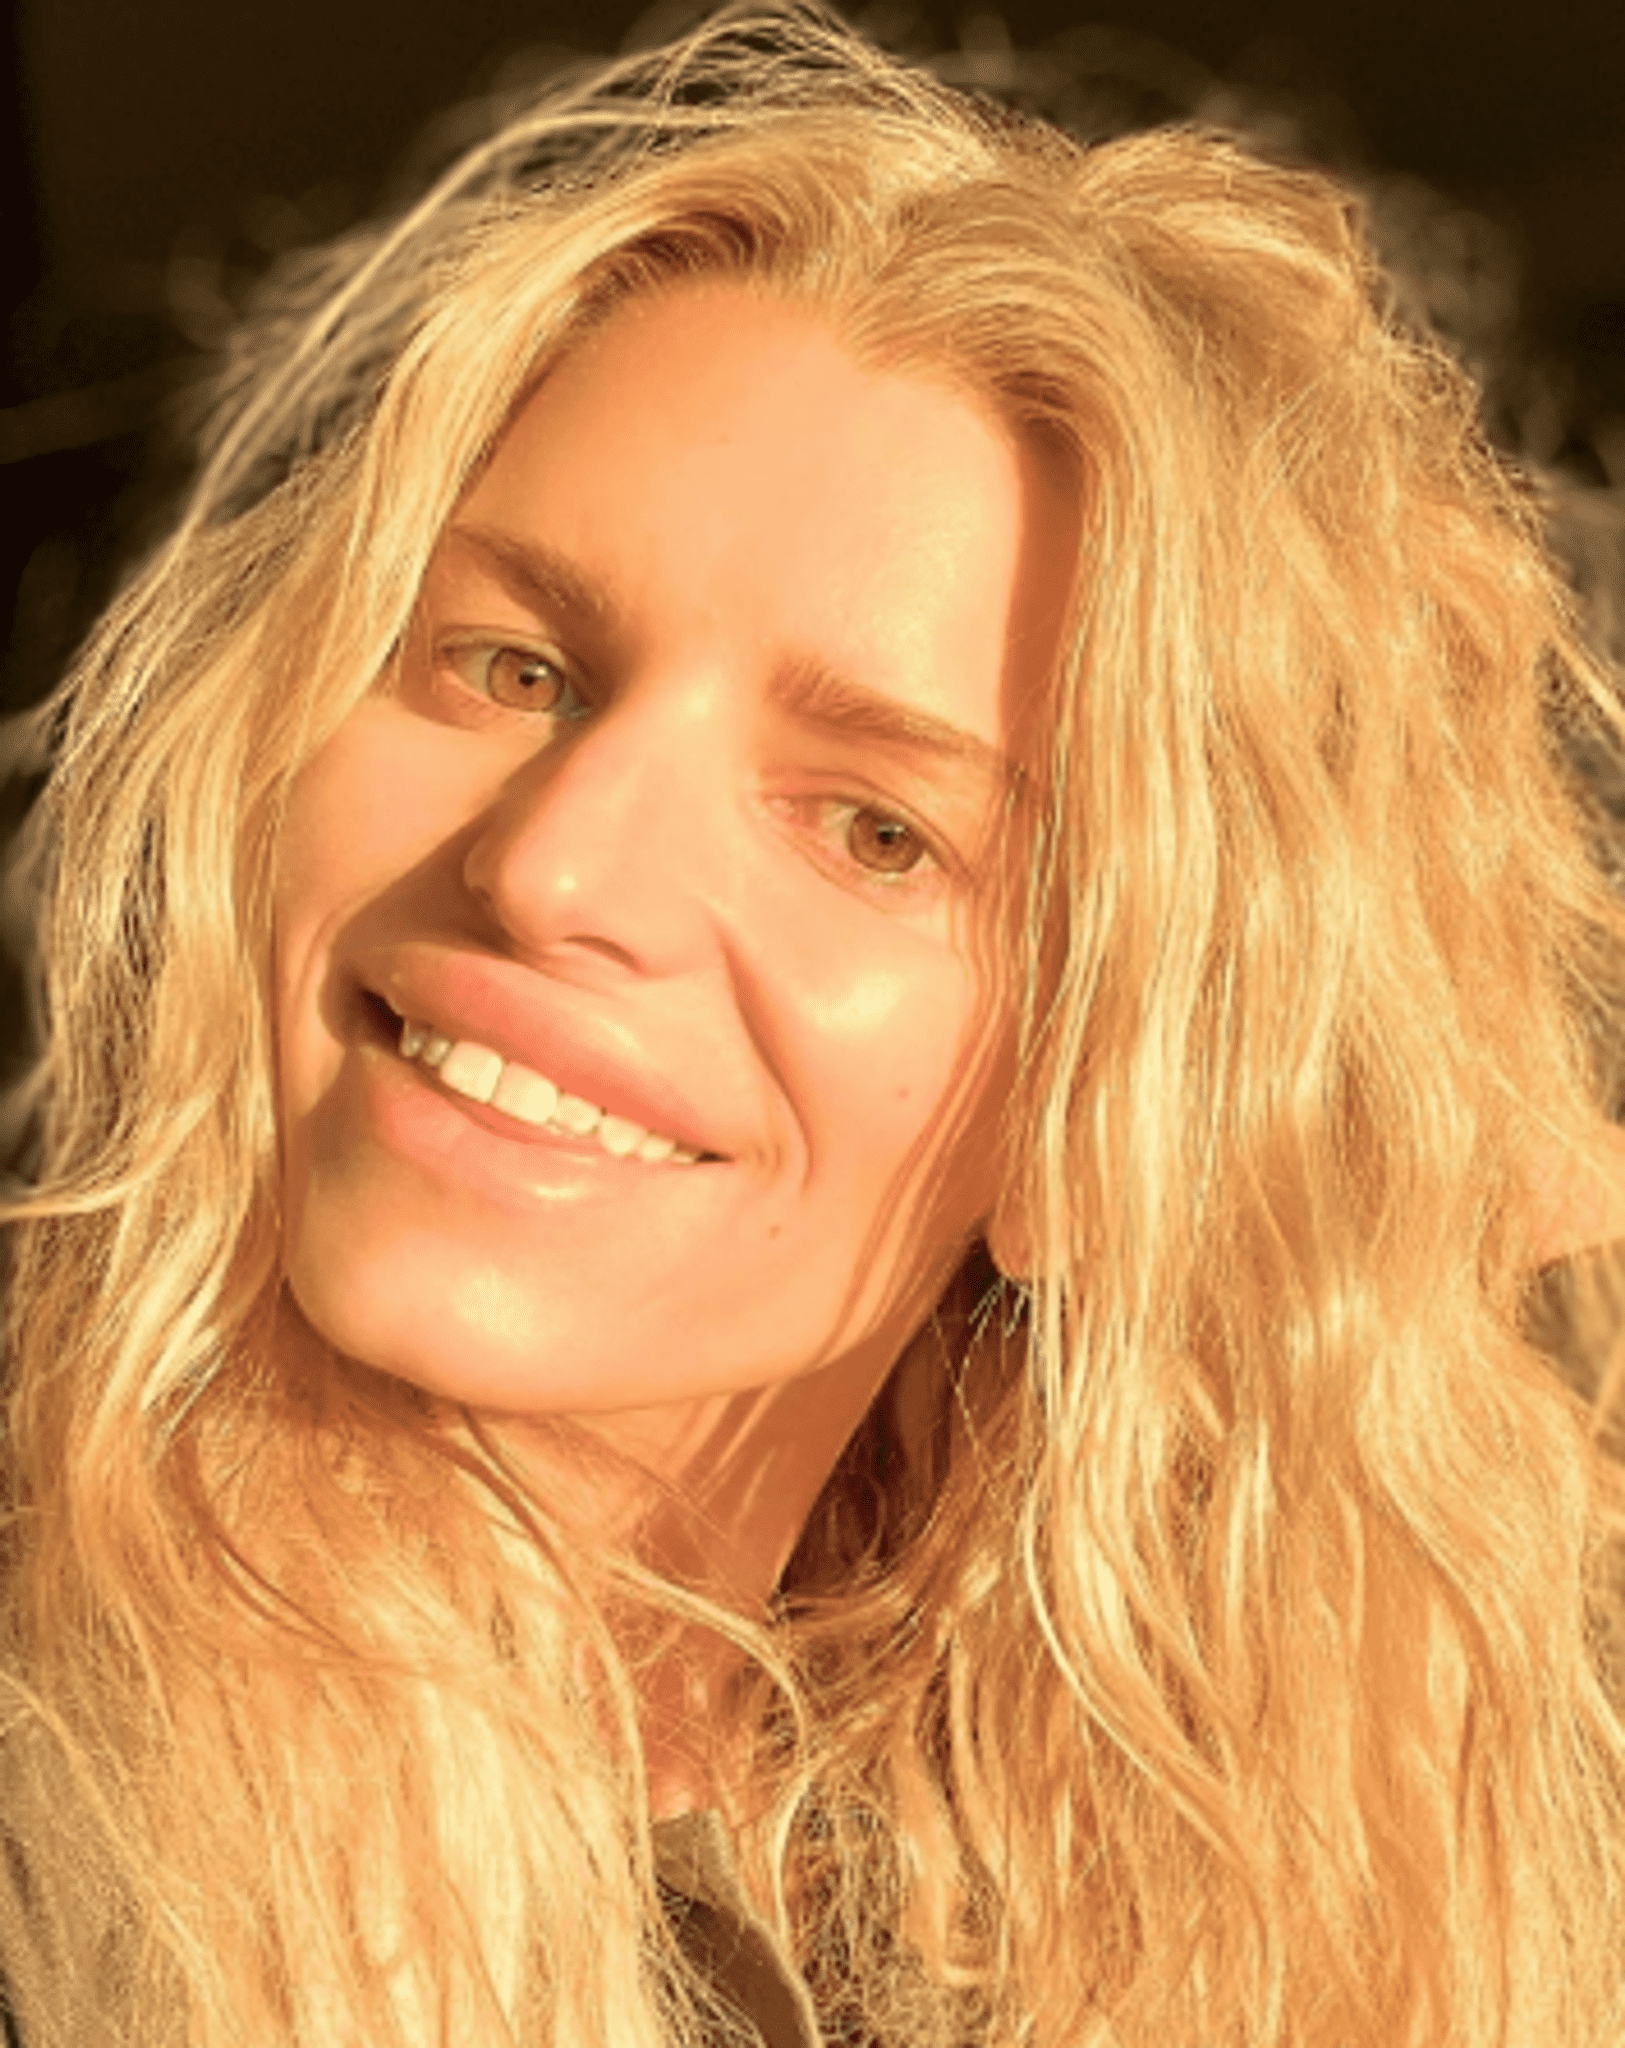 Jessica Simpson shared with fans a selfie without makeup